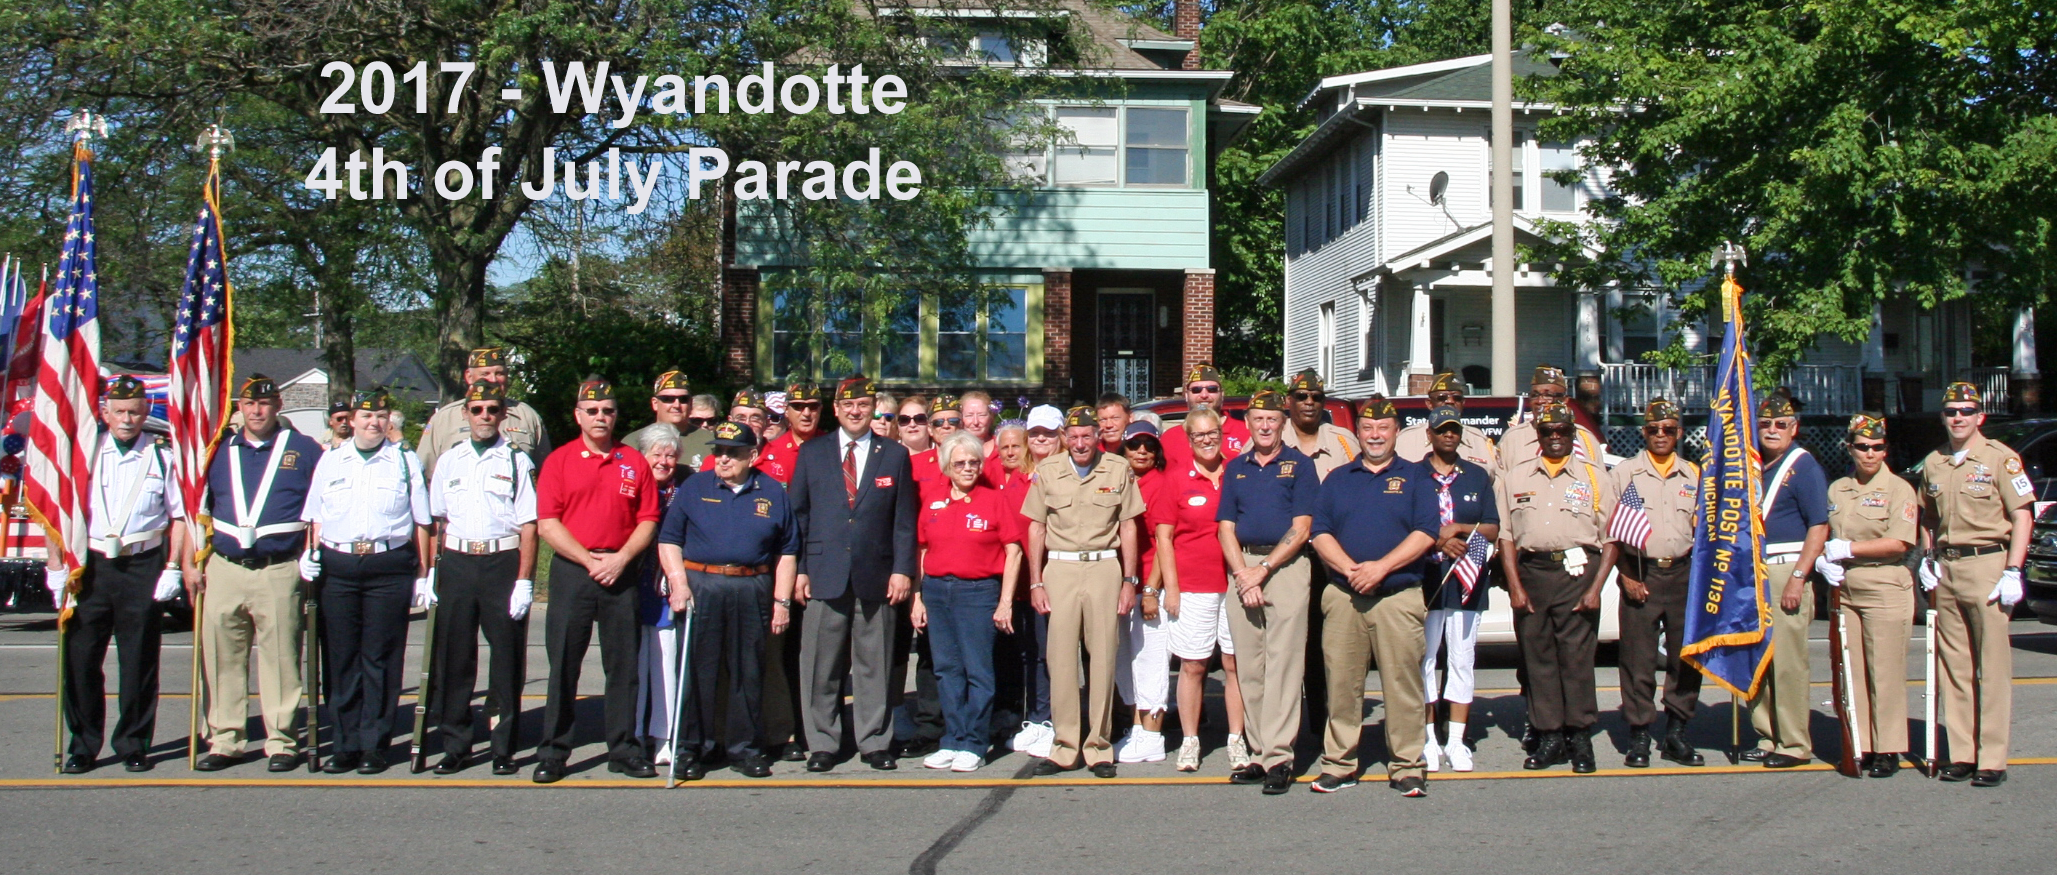 District 4 members assemble along with VFW State Commander Matt David before parade begins.